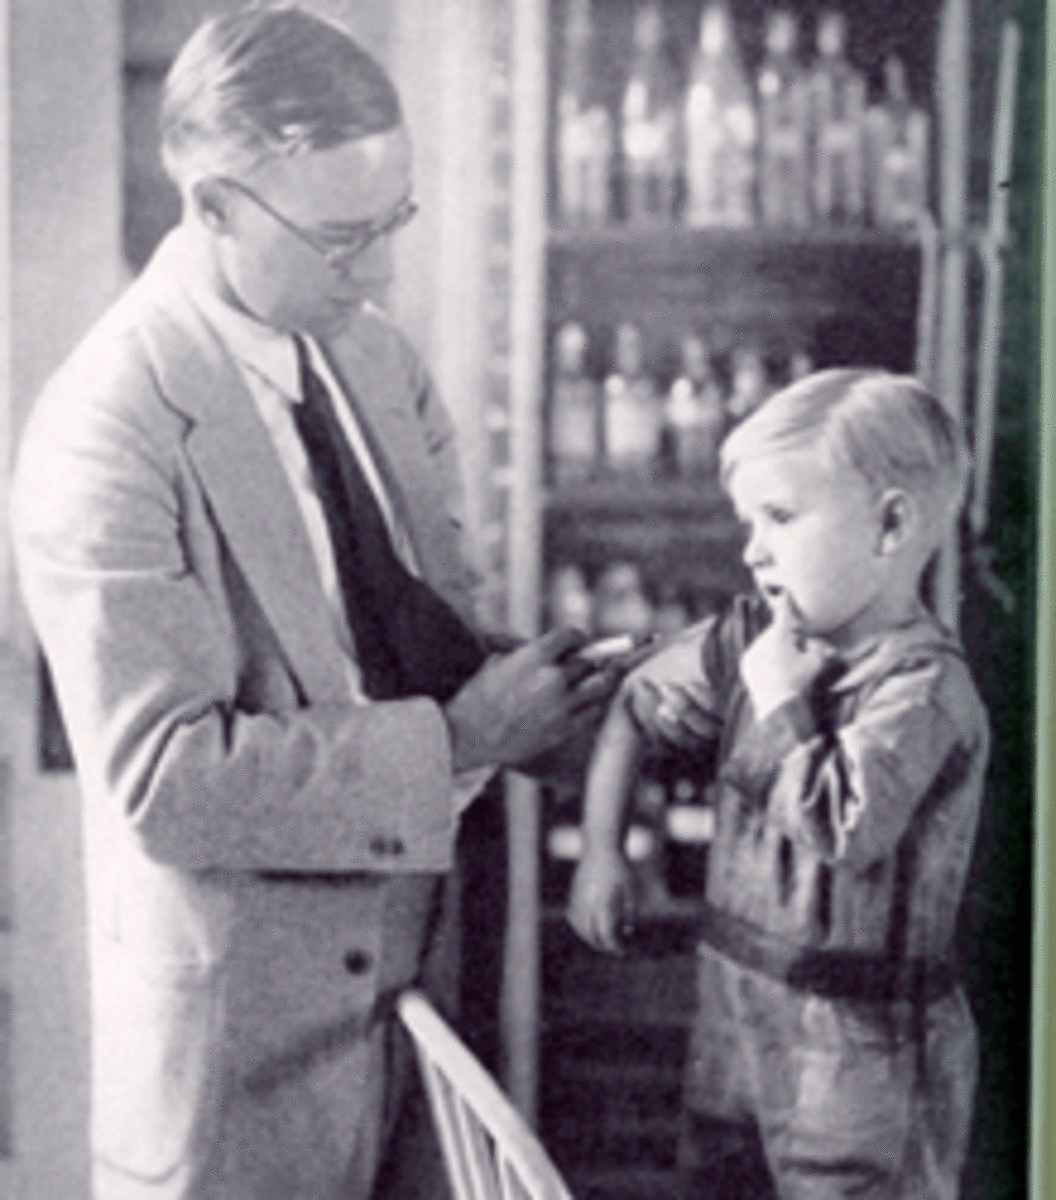 A child receives a rabies vaccine after being bitten by a rabid dog. Rutherford, Tennessee, 1929.